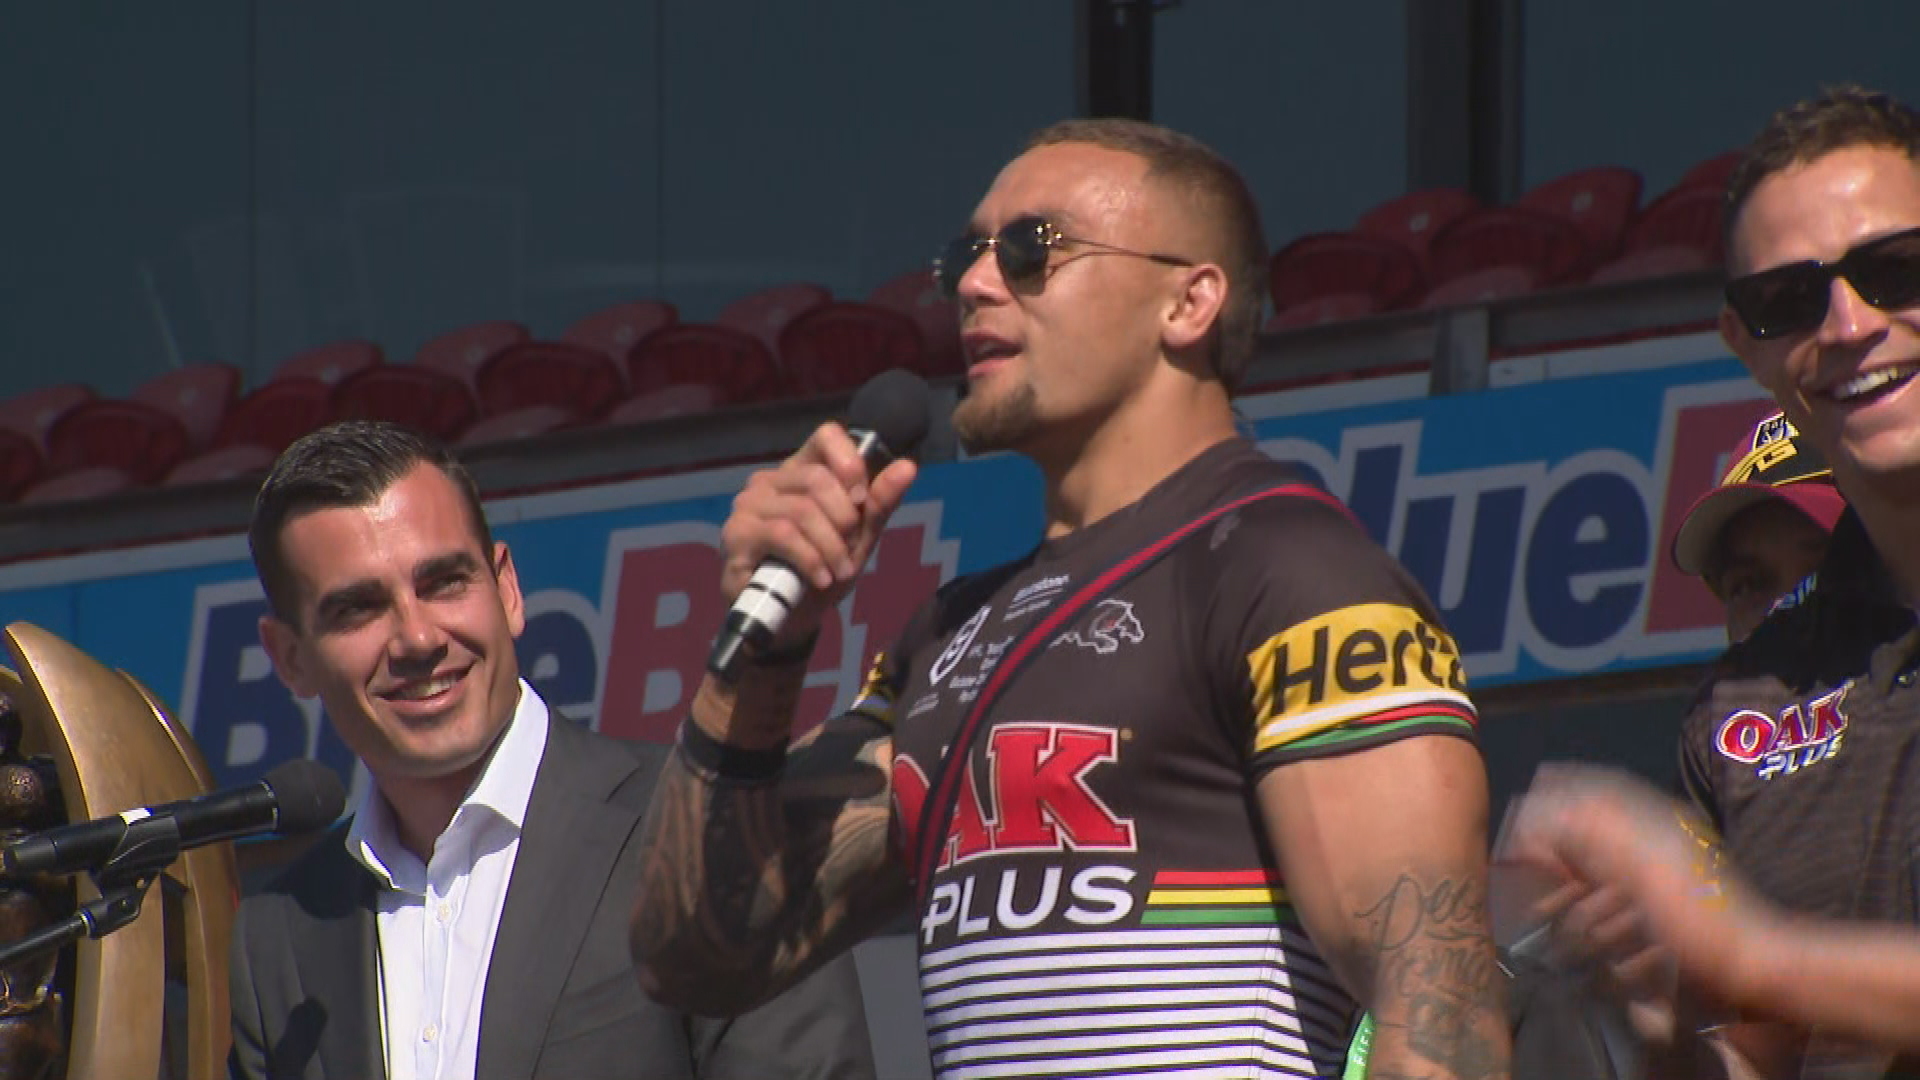 Penrith star James Fisher-Harris encourages the crowd at the premiership fan day.